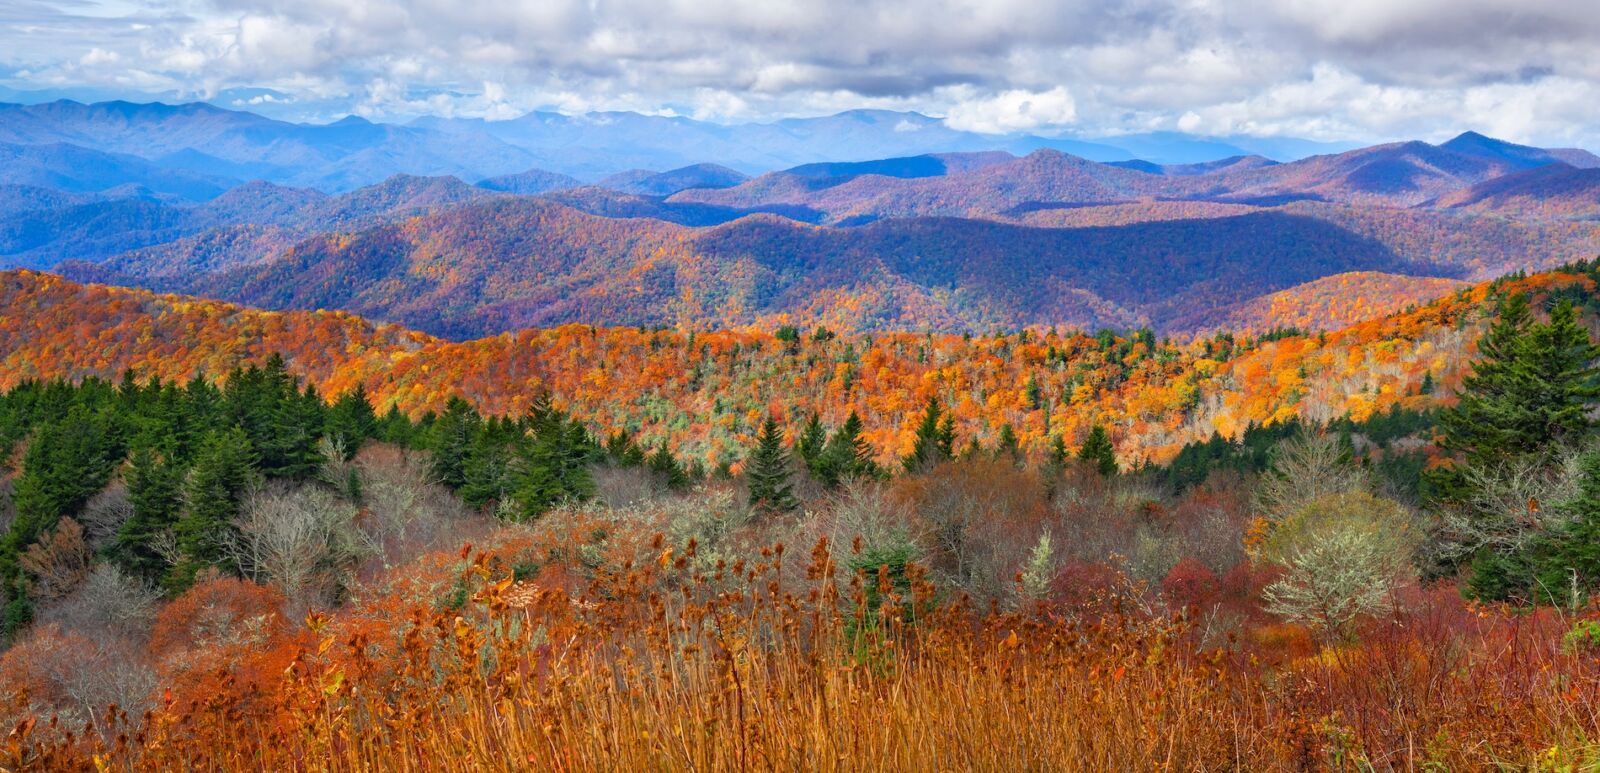 Beautiful autumn mountain panorama. Fall mountain scenery. A panoramic view of the Smoky Mountains from the Blue Ridge Parkway in North Carolina,USA. Image for banner or web header. Photo via Shutterstock.